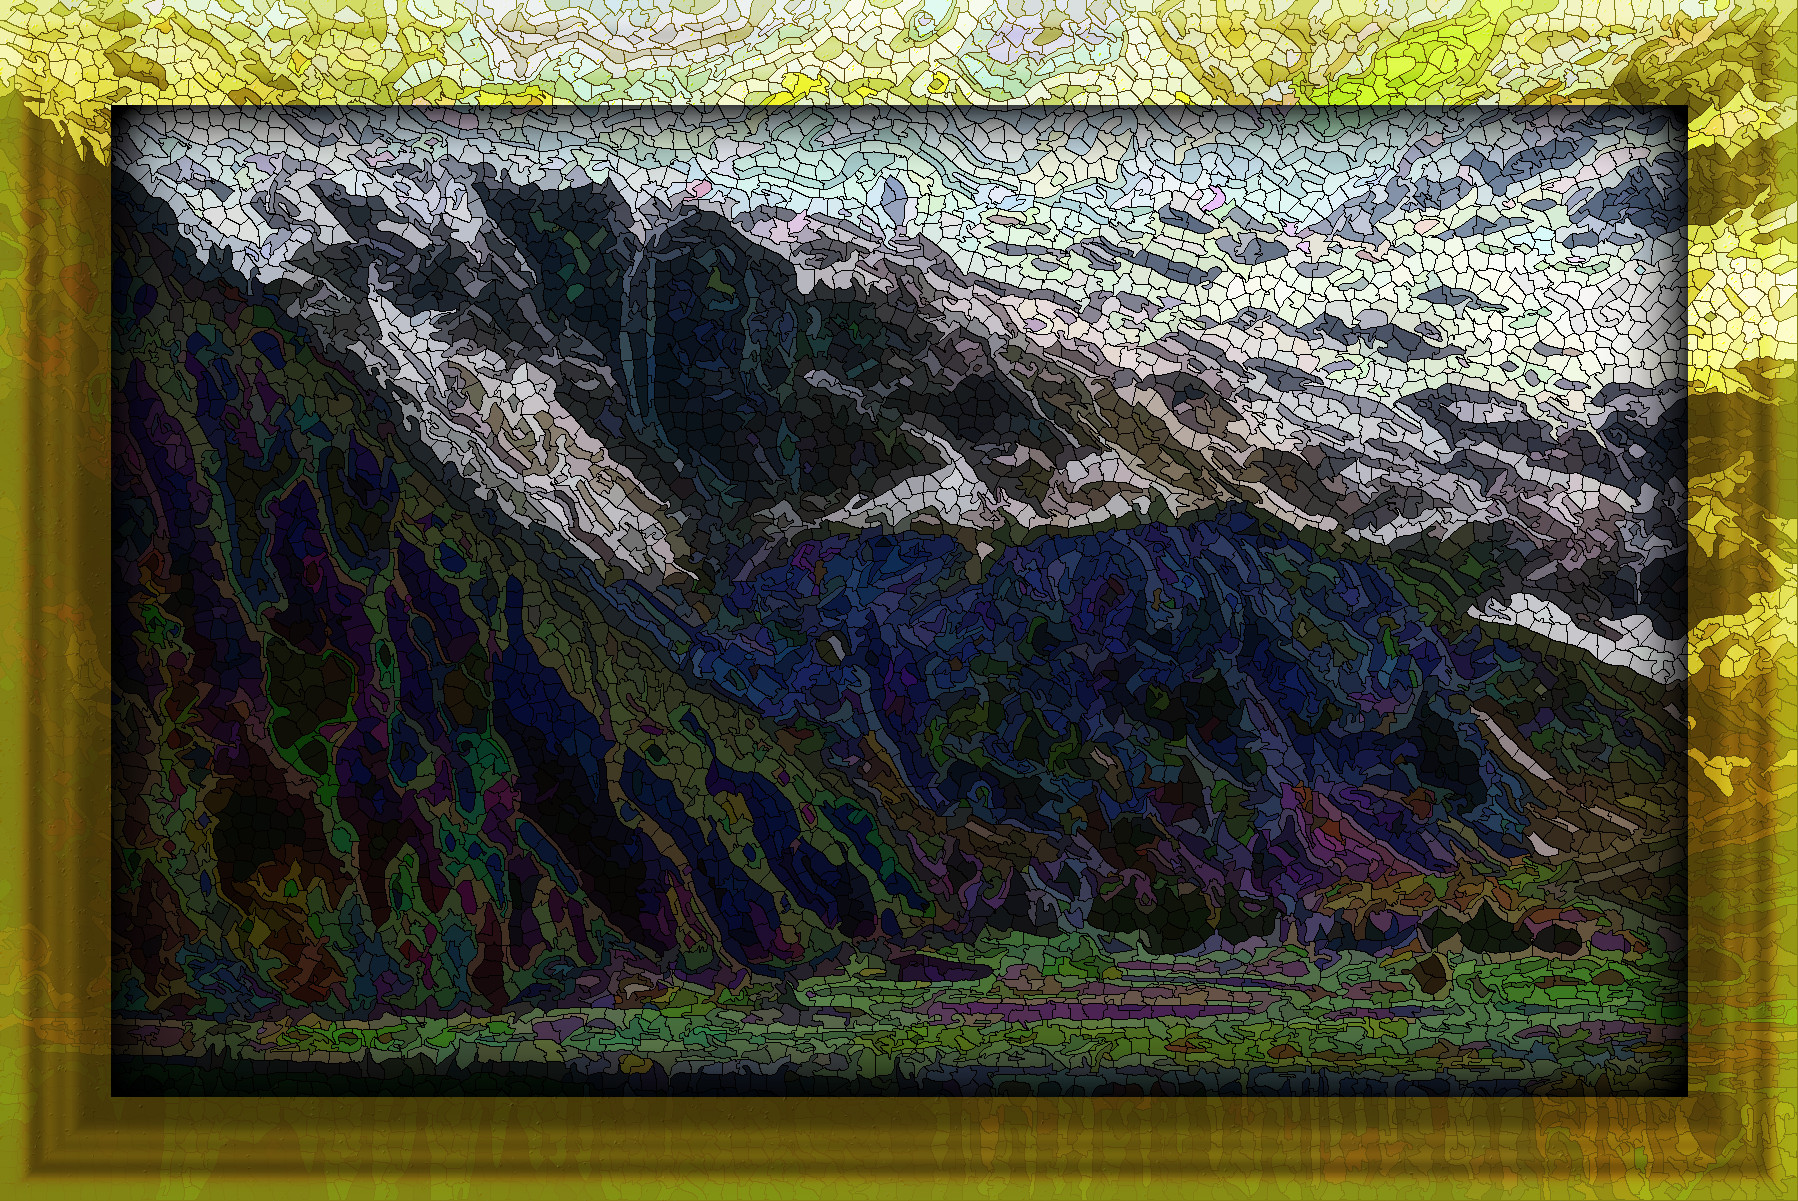 2021-08-01 10-20-43 mountain_003 with JVID effect J (SuperPixel Graphic).jpg